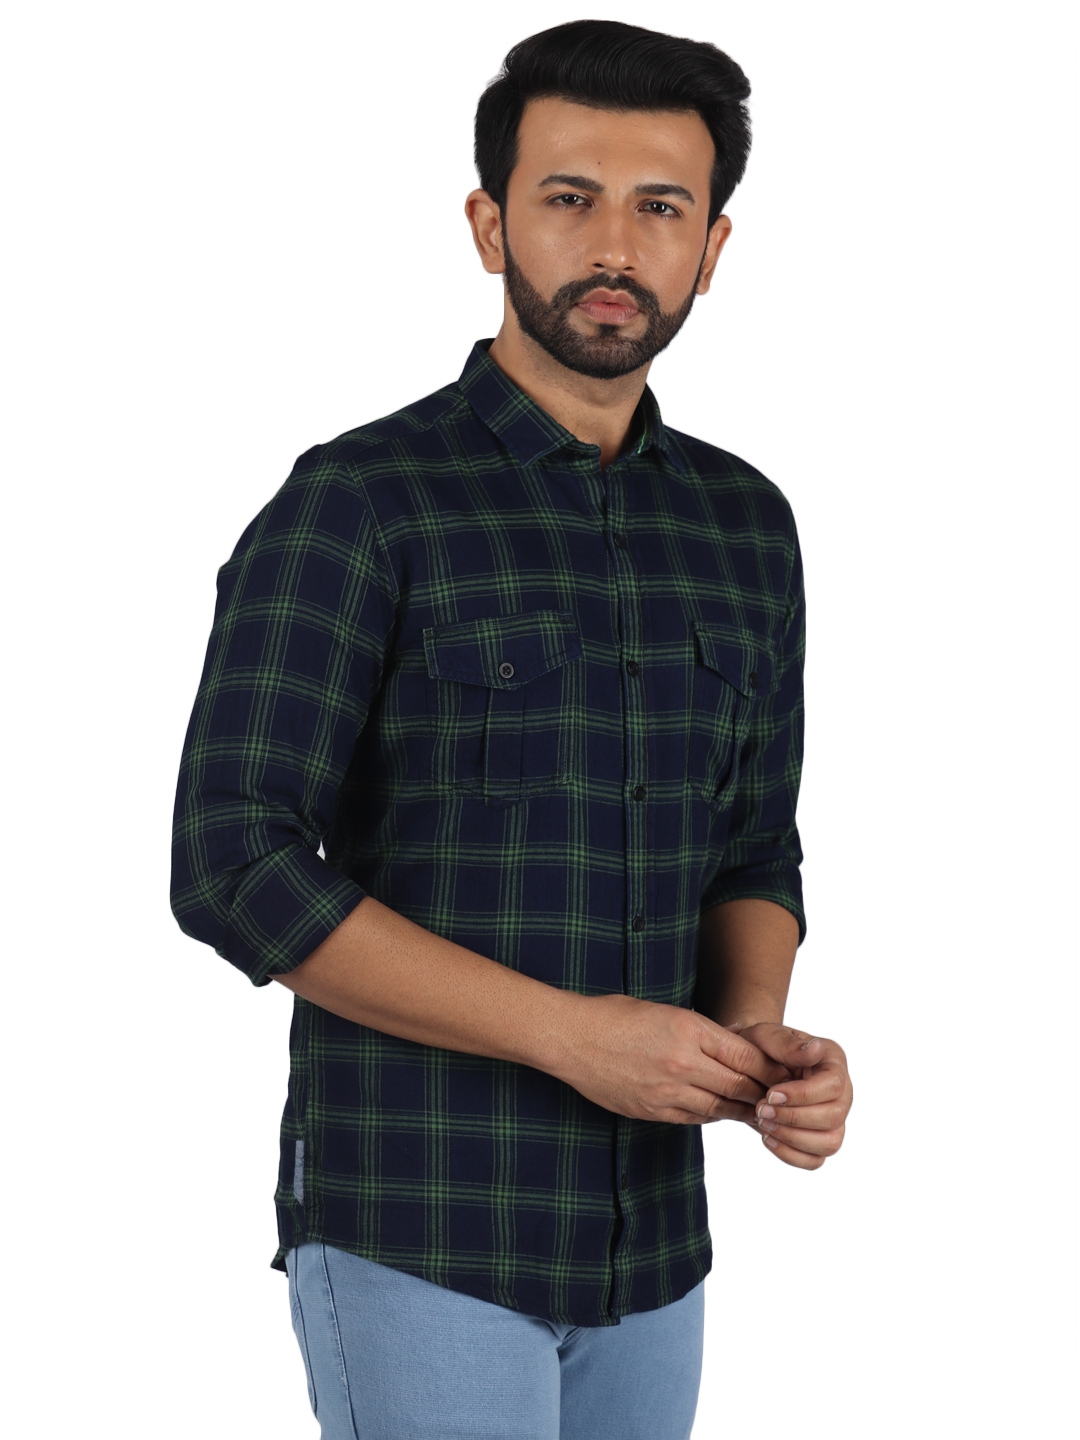 D'cot by Donear | D'cot by Donear Men's Green and Navy Cotton Casual Shirts 2